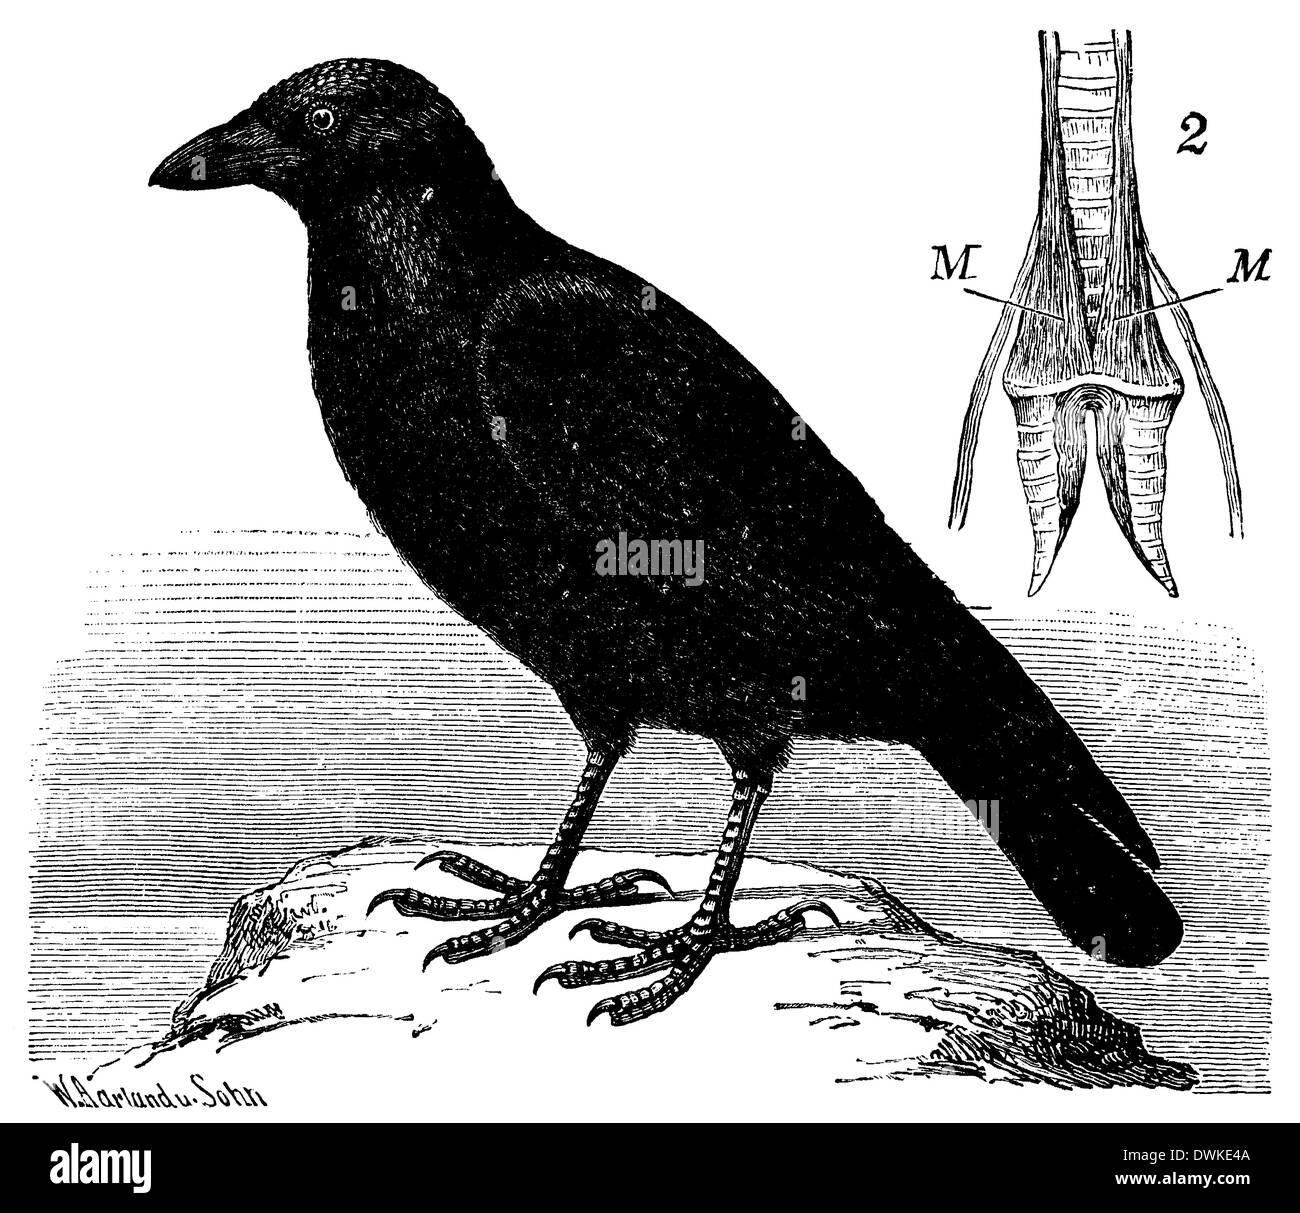 Ravens. 2) larynx, seen from the front with the singing muscles M Stock Photo